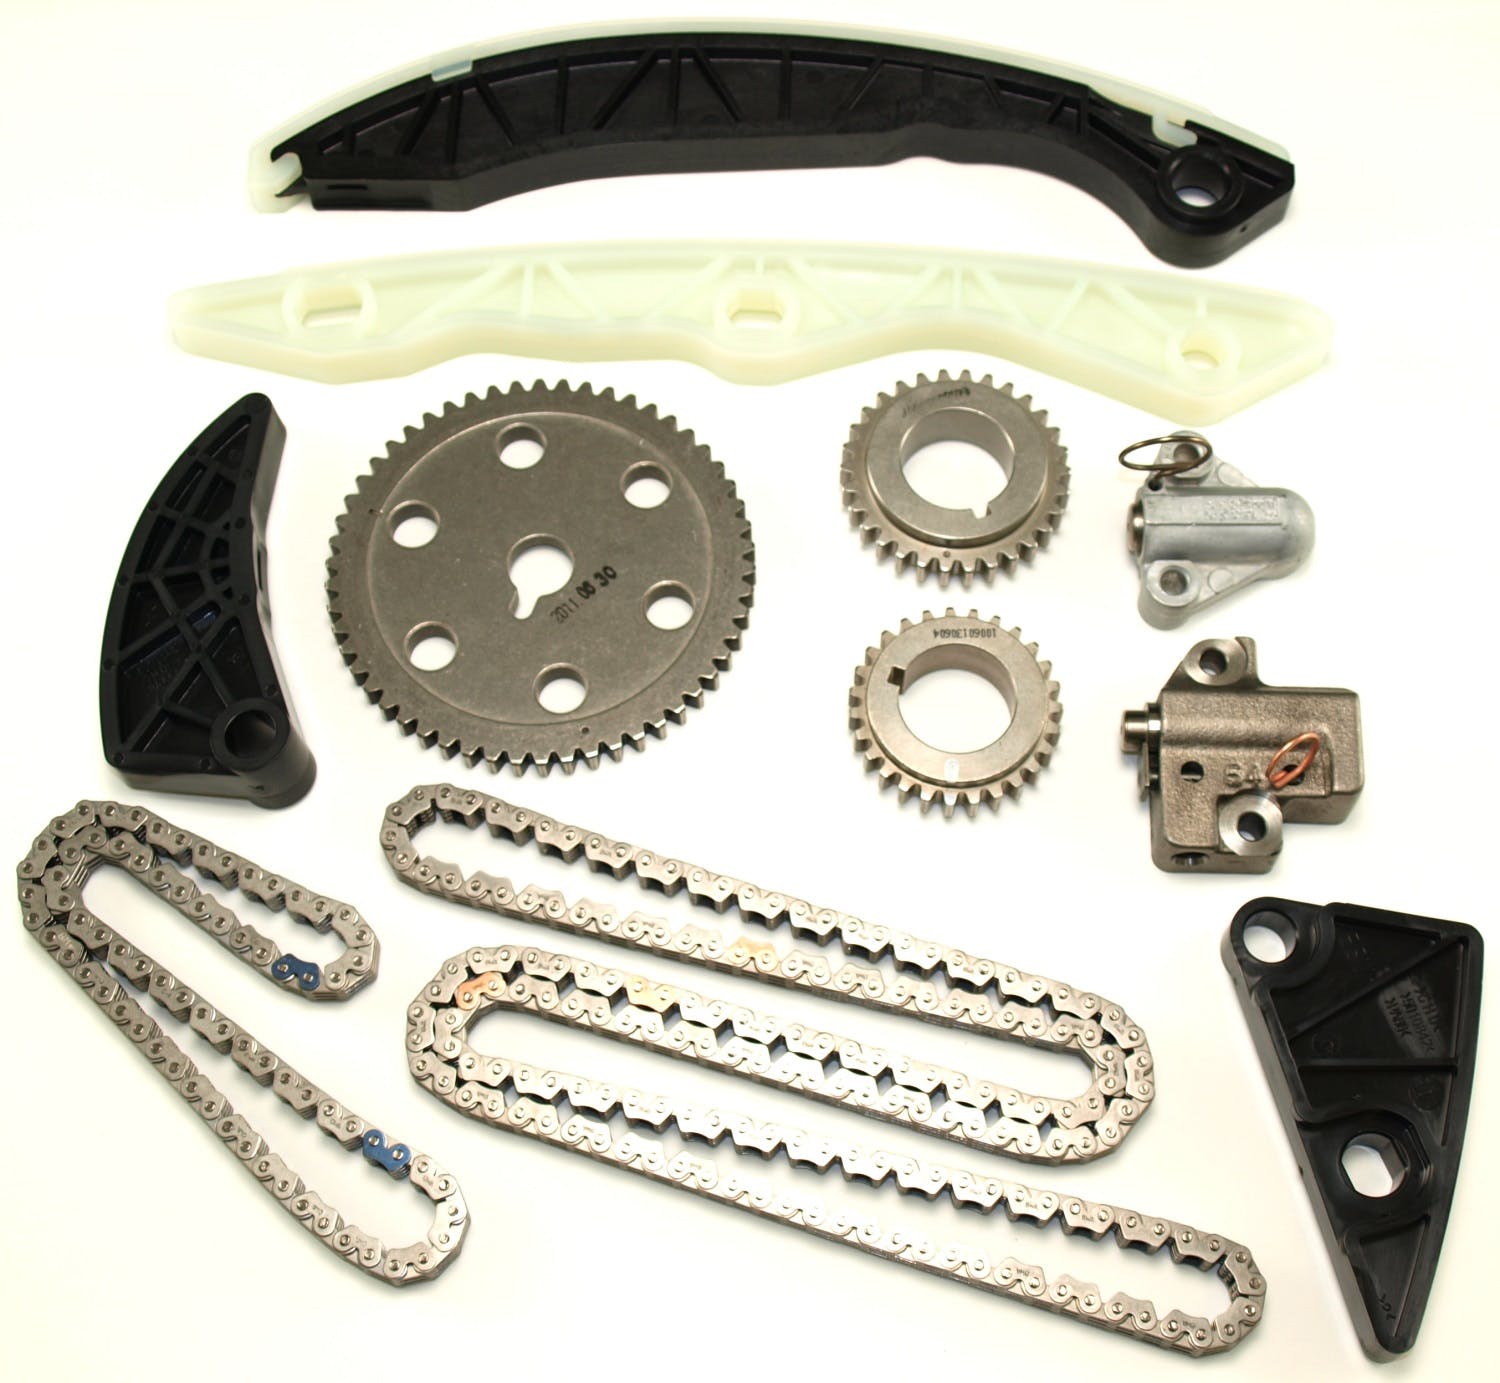 Cloyes 9-0900S Engine Timing Chain Kit Engine Timing Chain Kit